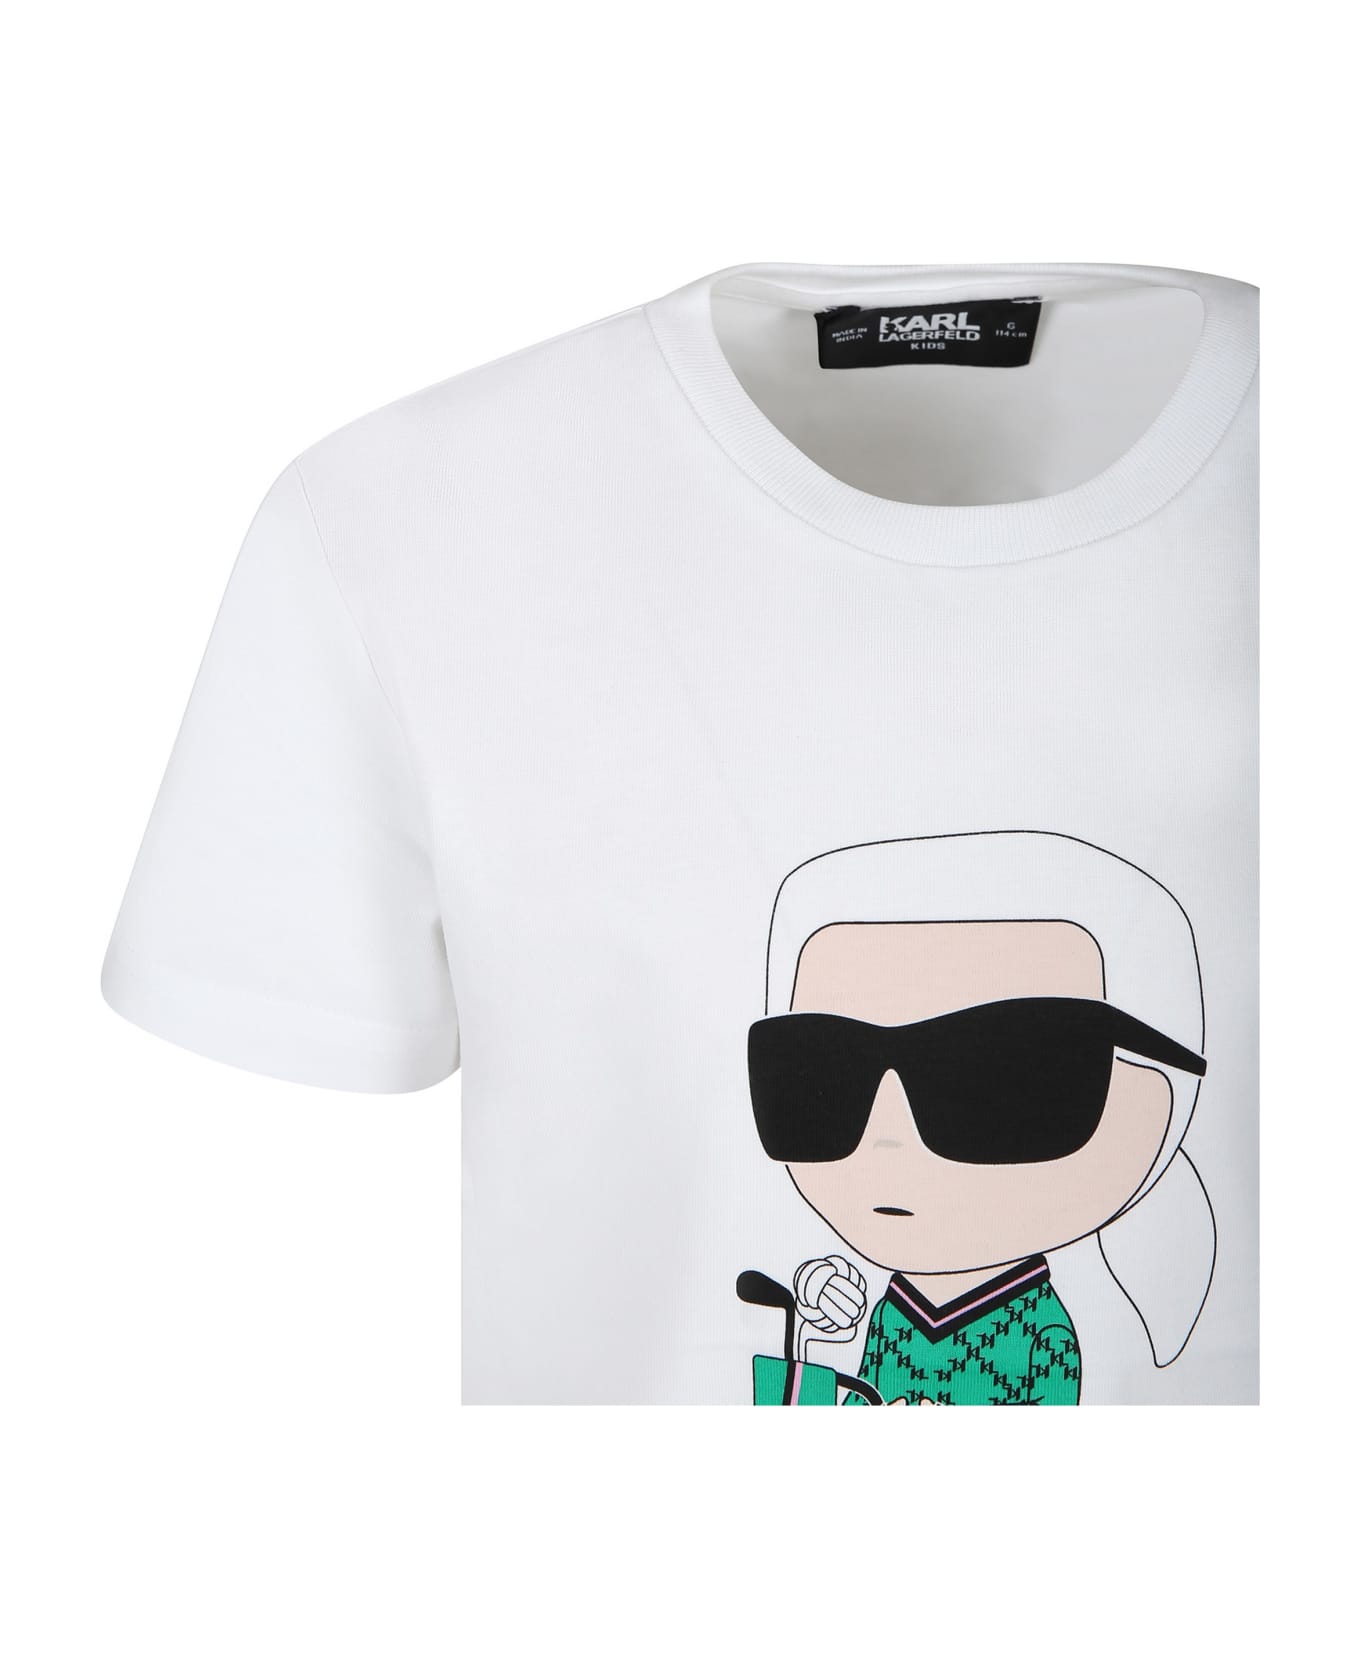 Karl Lagerfeld Kids White T-shirt For Kids With Karl And Golf Bag Print - White Tシャツ＆ポロシャツ